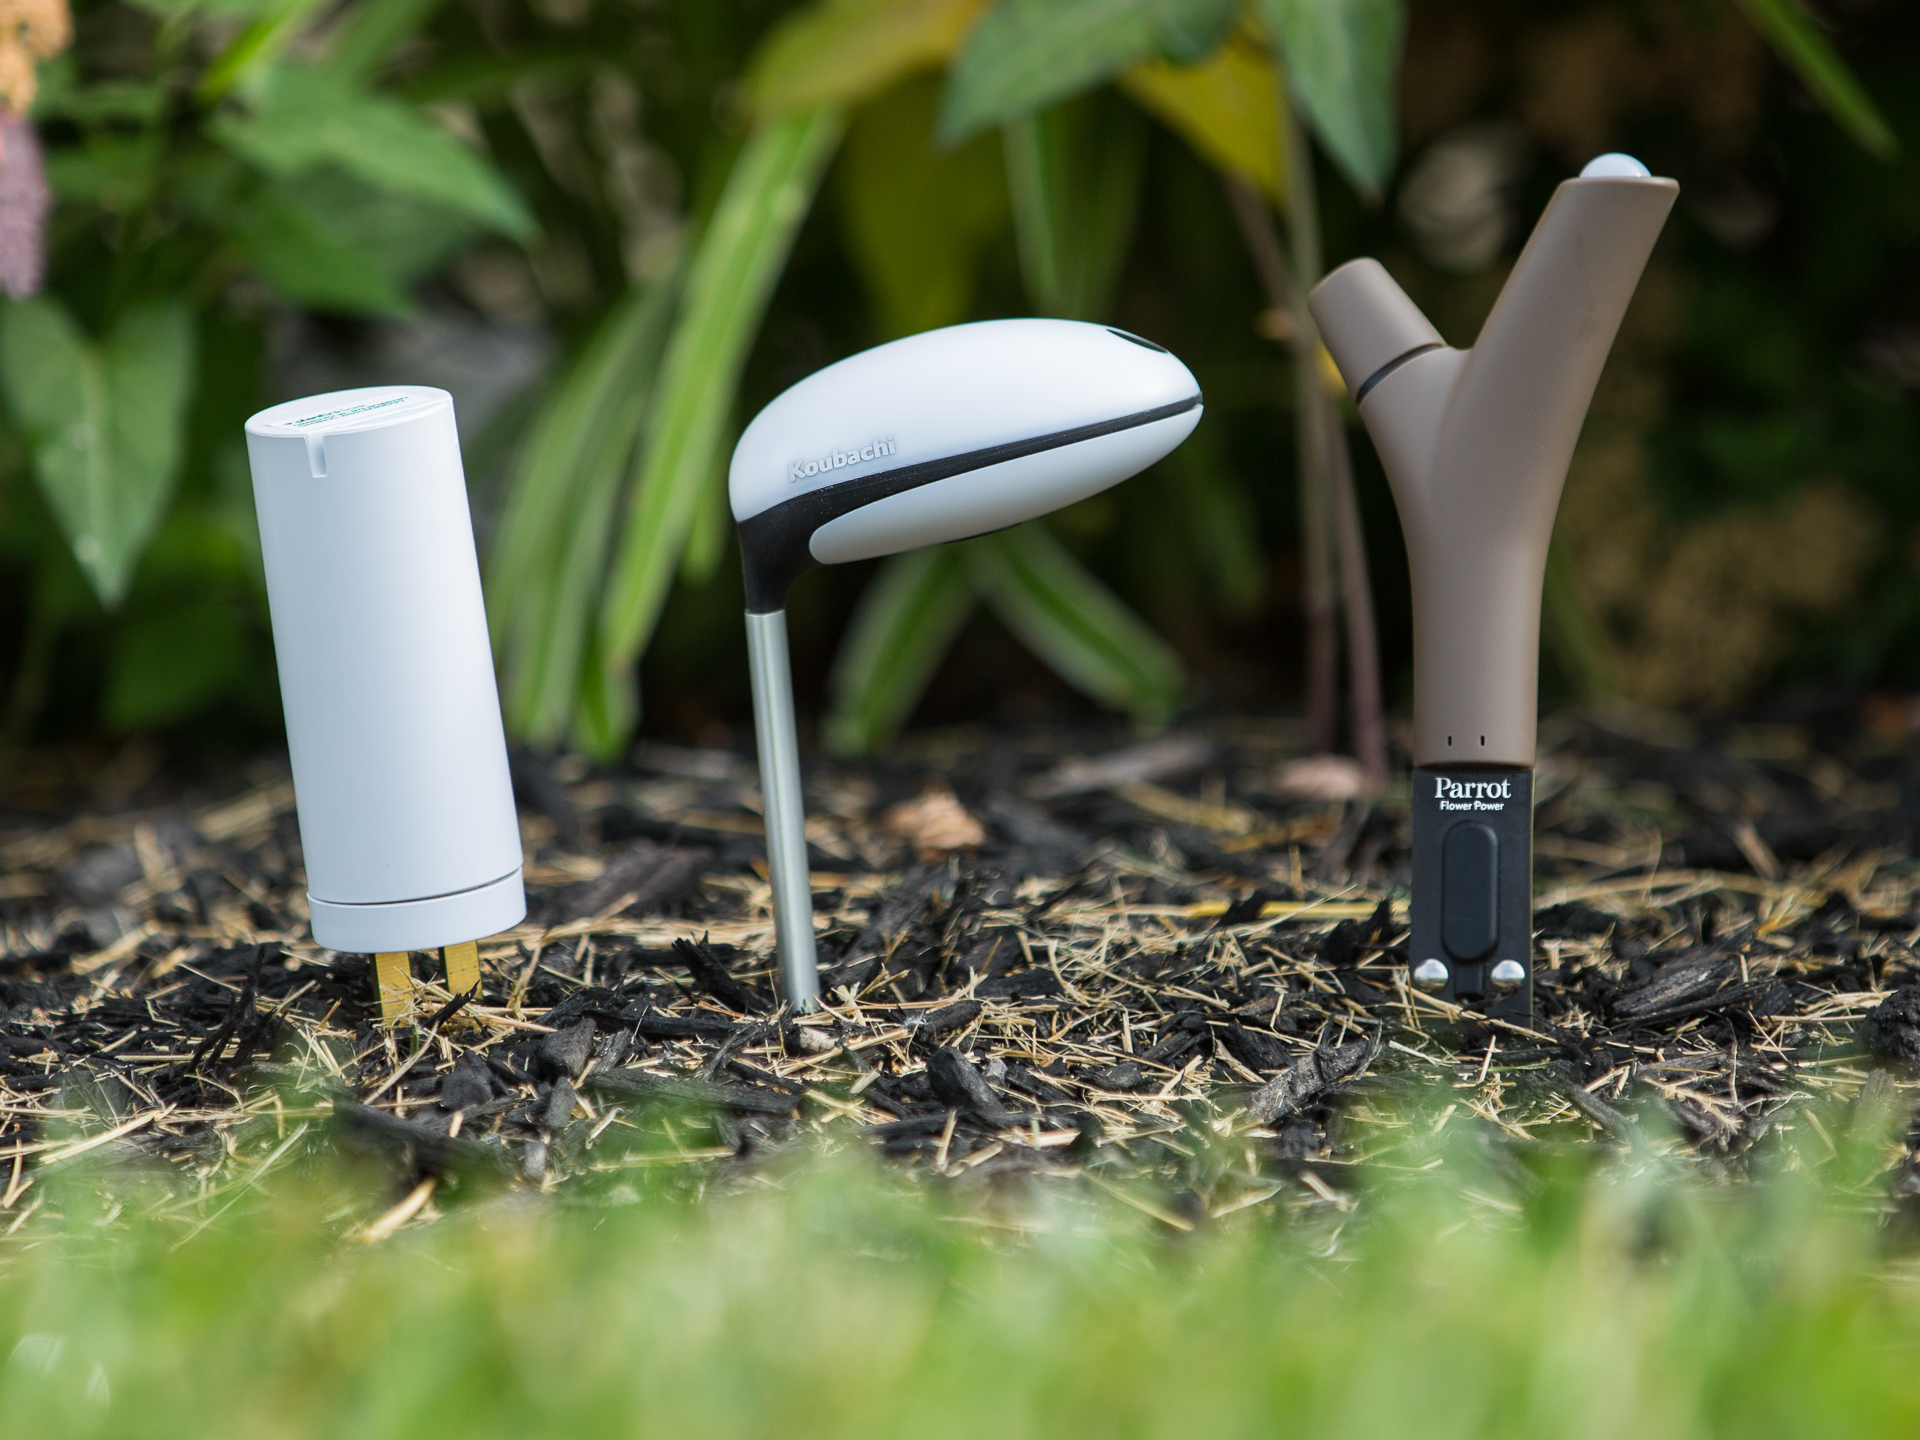 These gadgets will tell you helpful info about your garden. Credit: CNET